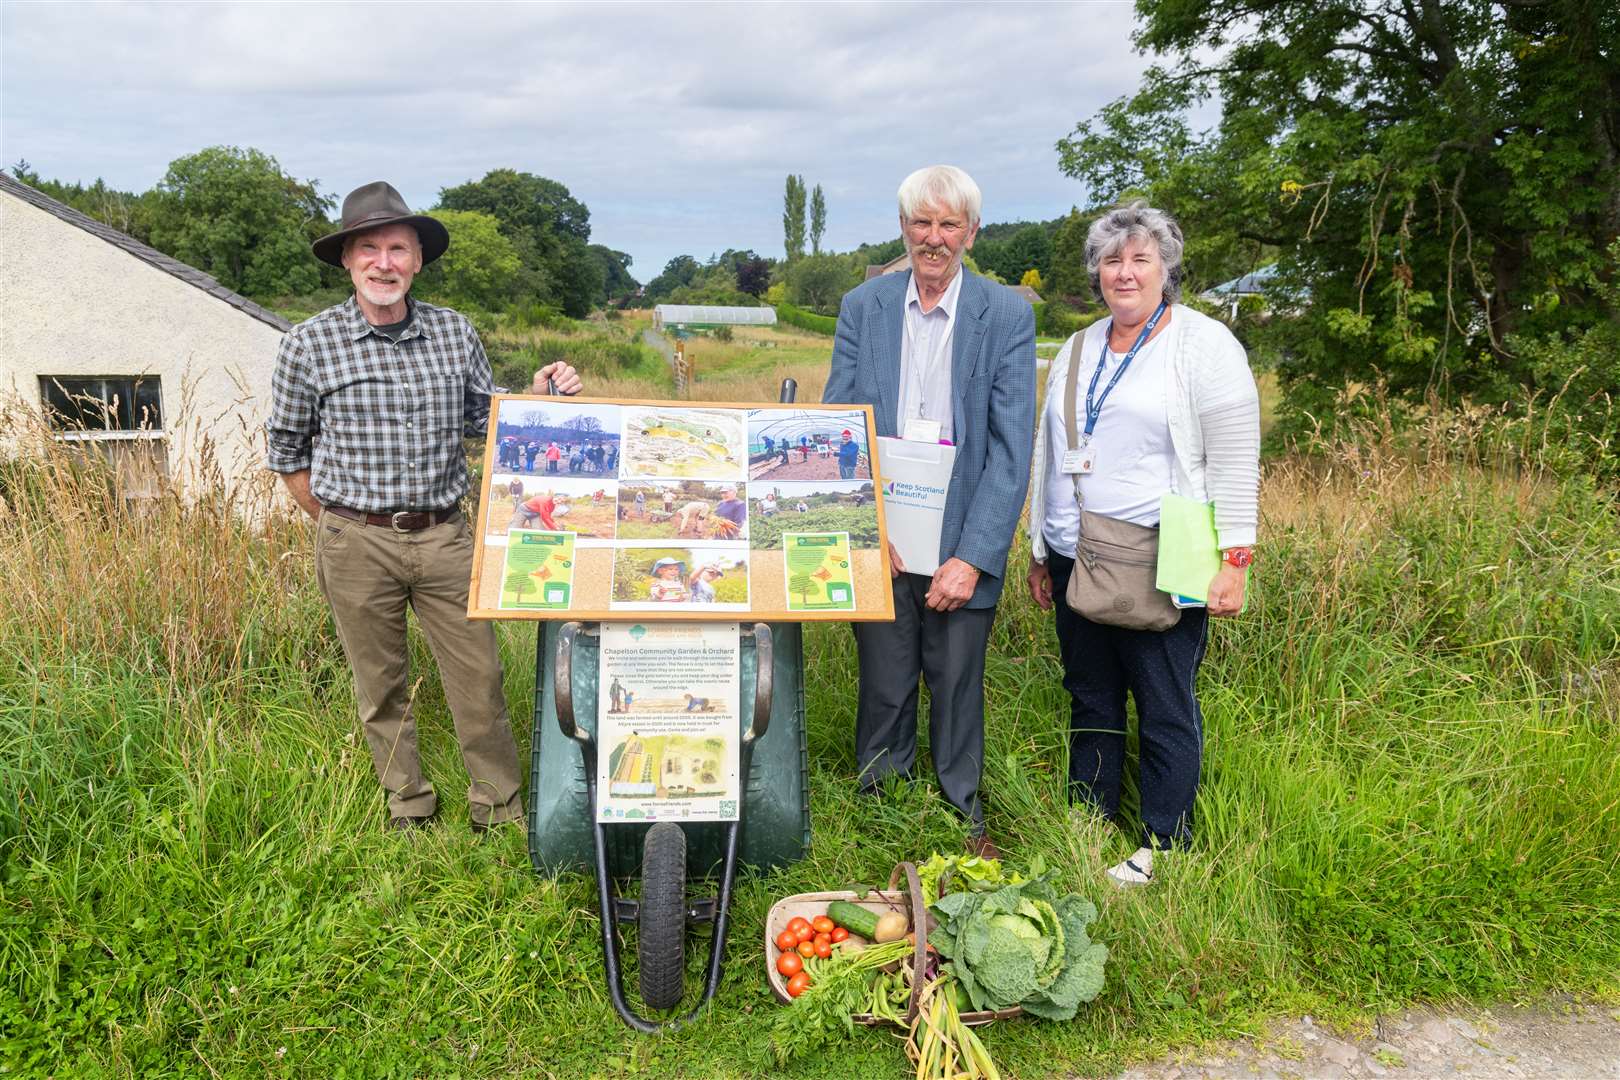 George Paul of Forres Friends of Woods and Fields with the judges Terry Stott and Penny Wright at the Chapelton Community Garden and Orchard.